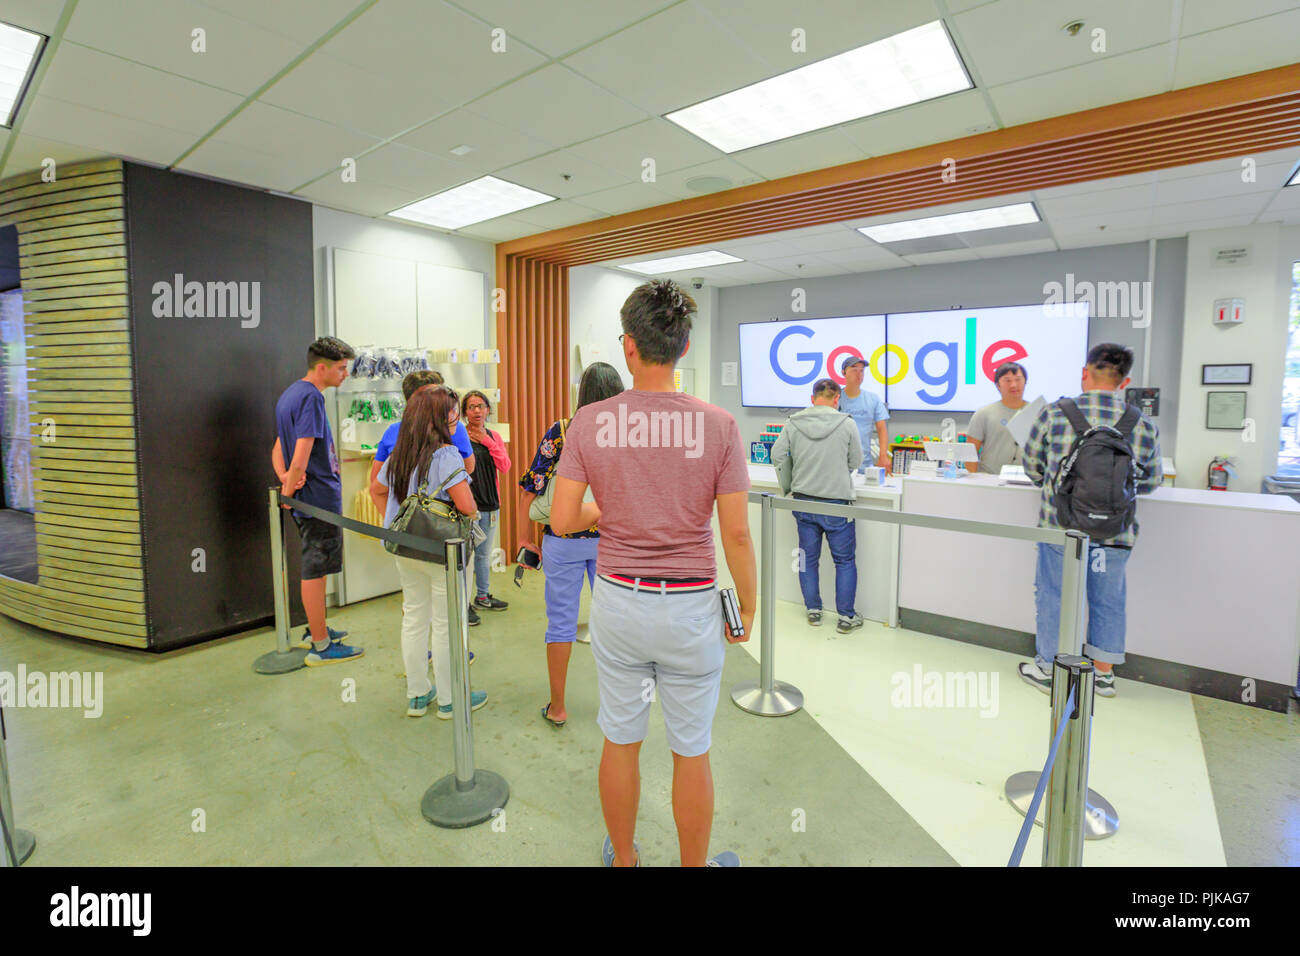 Mountain View, California, United States - August 13, 2018: interior of Merchandise Store of Google that sells T-shirts, hats, mugs and souvenirs with Google, YouTube, Android and branding. Stock Photo